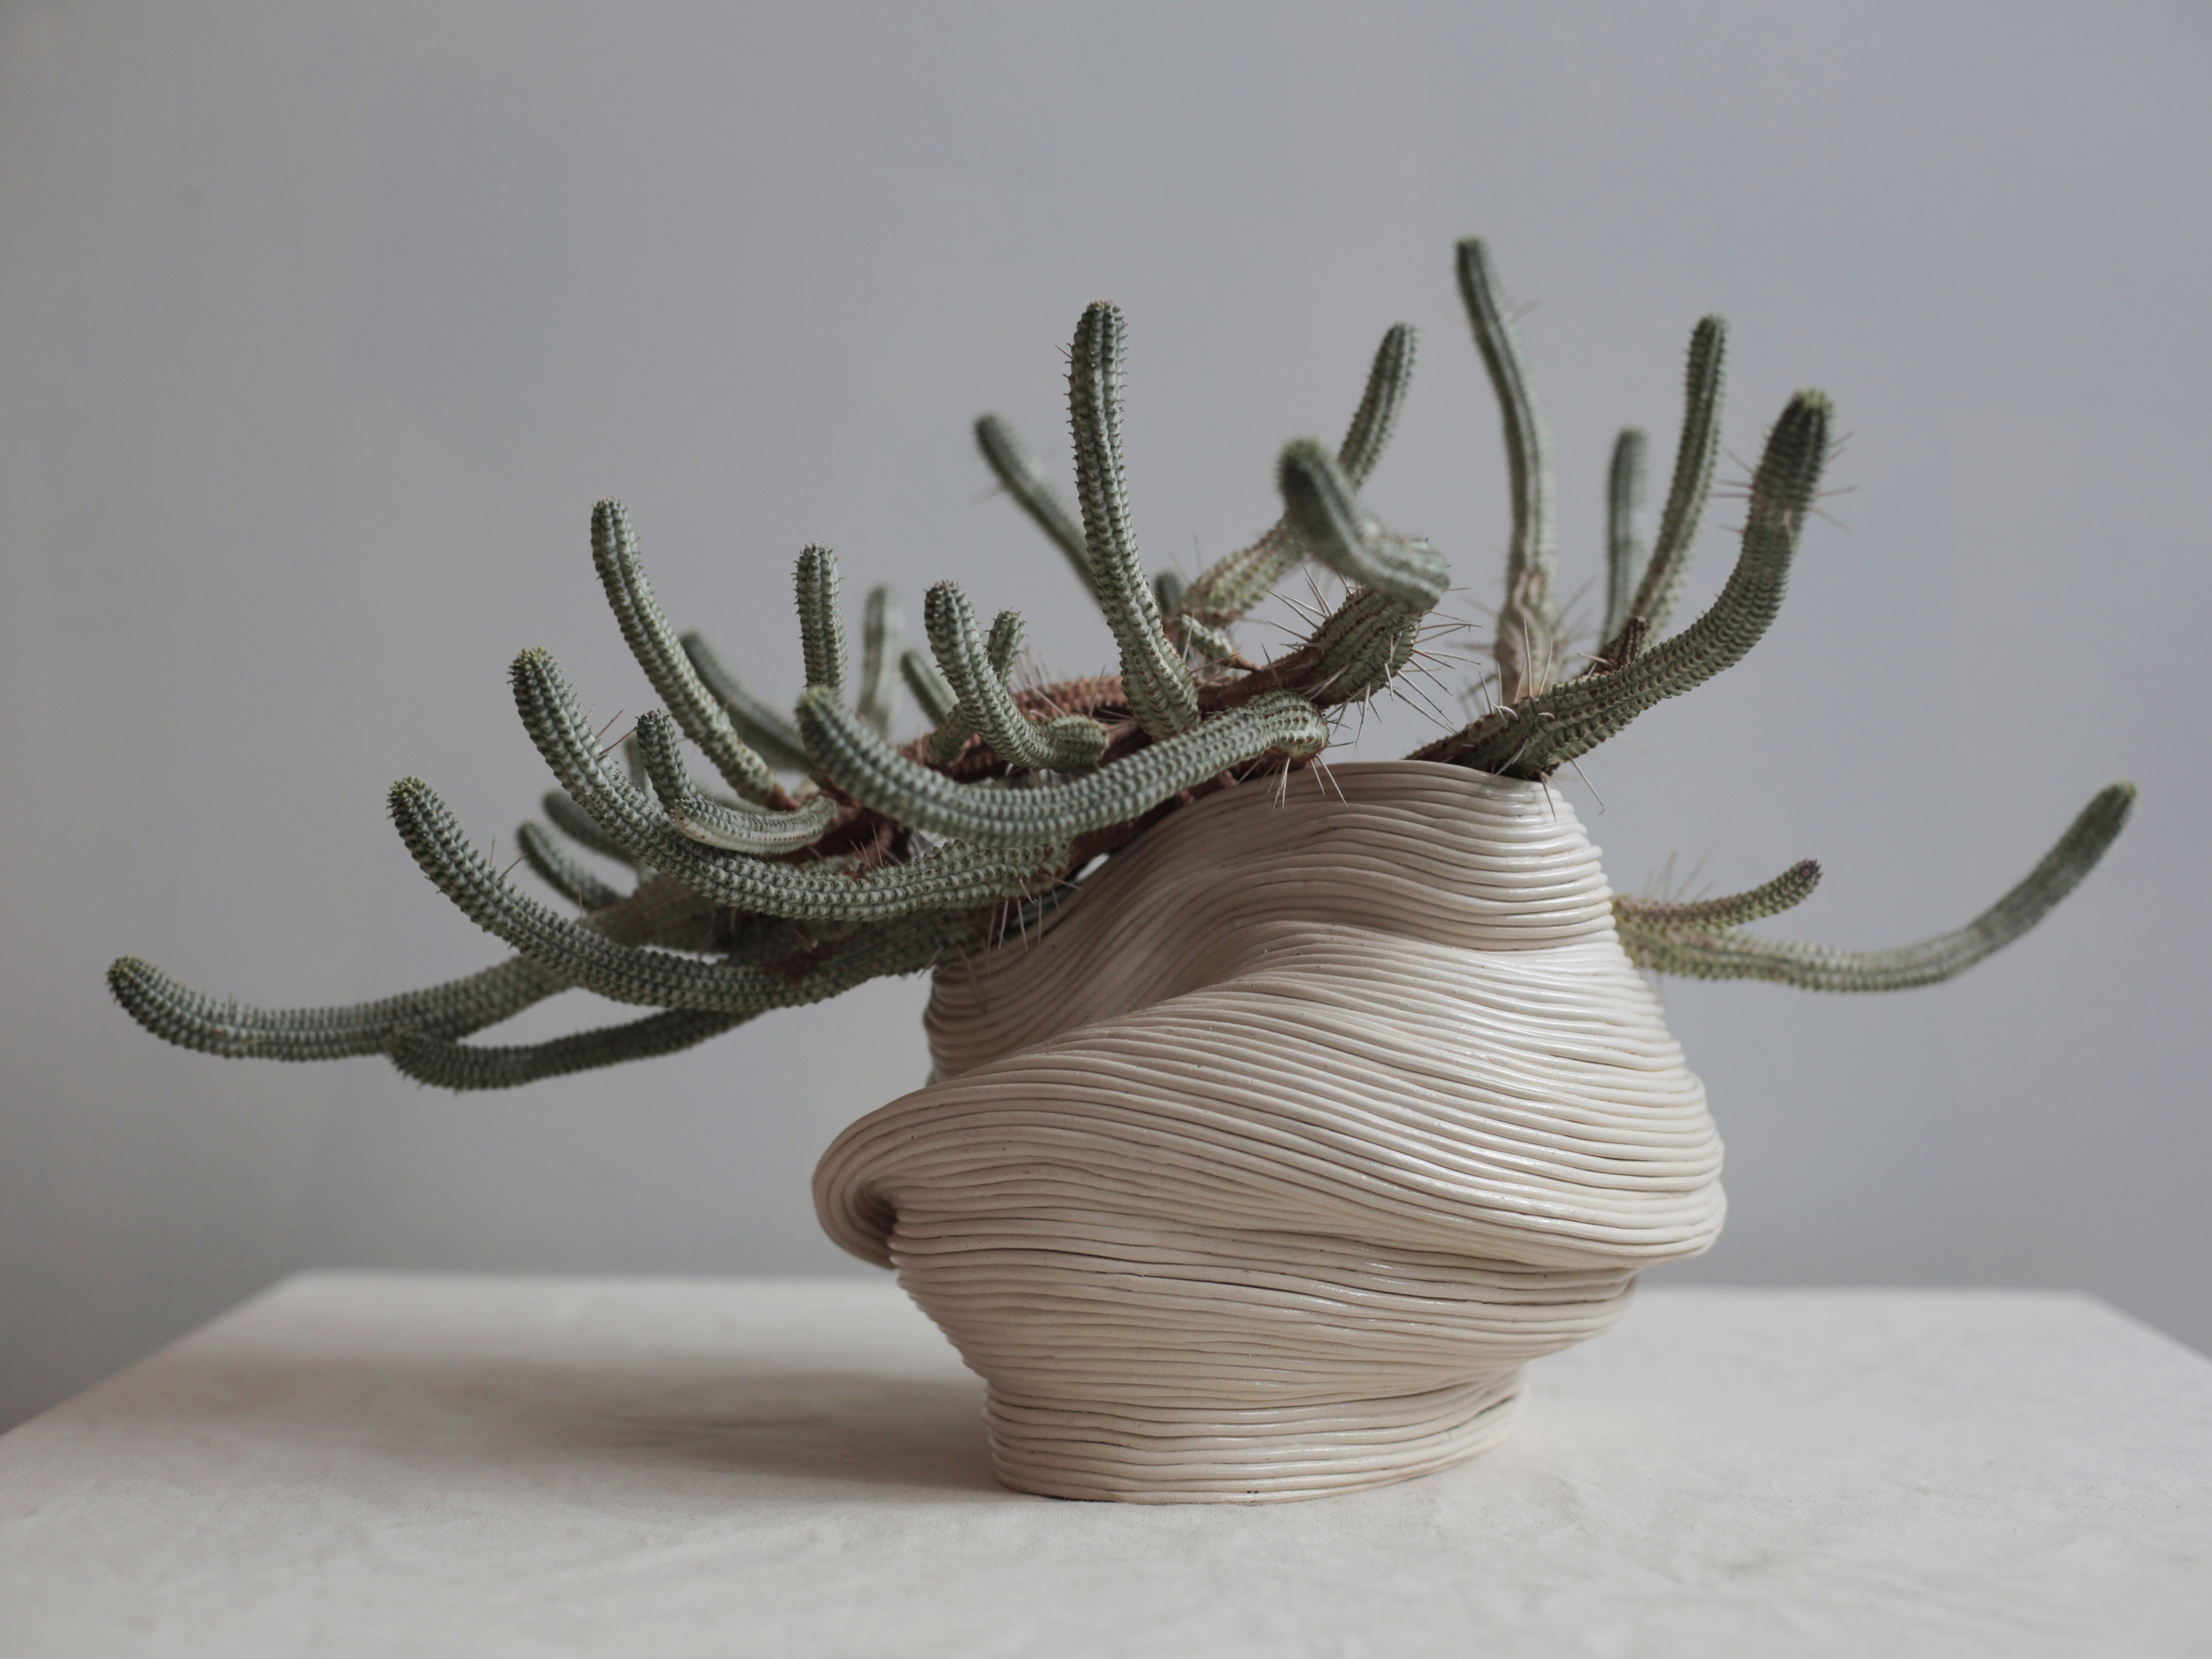   Vessel with outstretched arms, &nbsp;2016.&nbsp;  Ceramic with Euphorbia Mammillaris variegata 